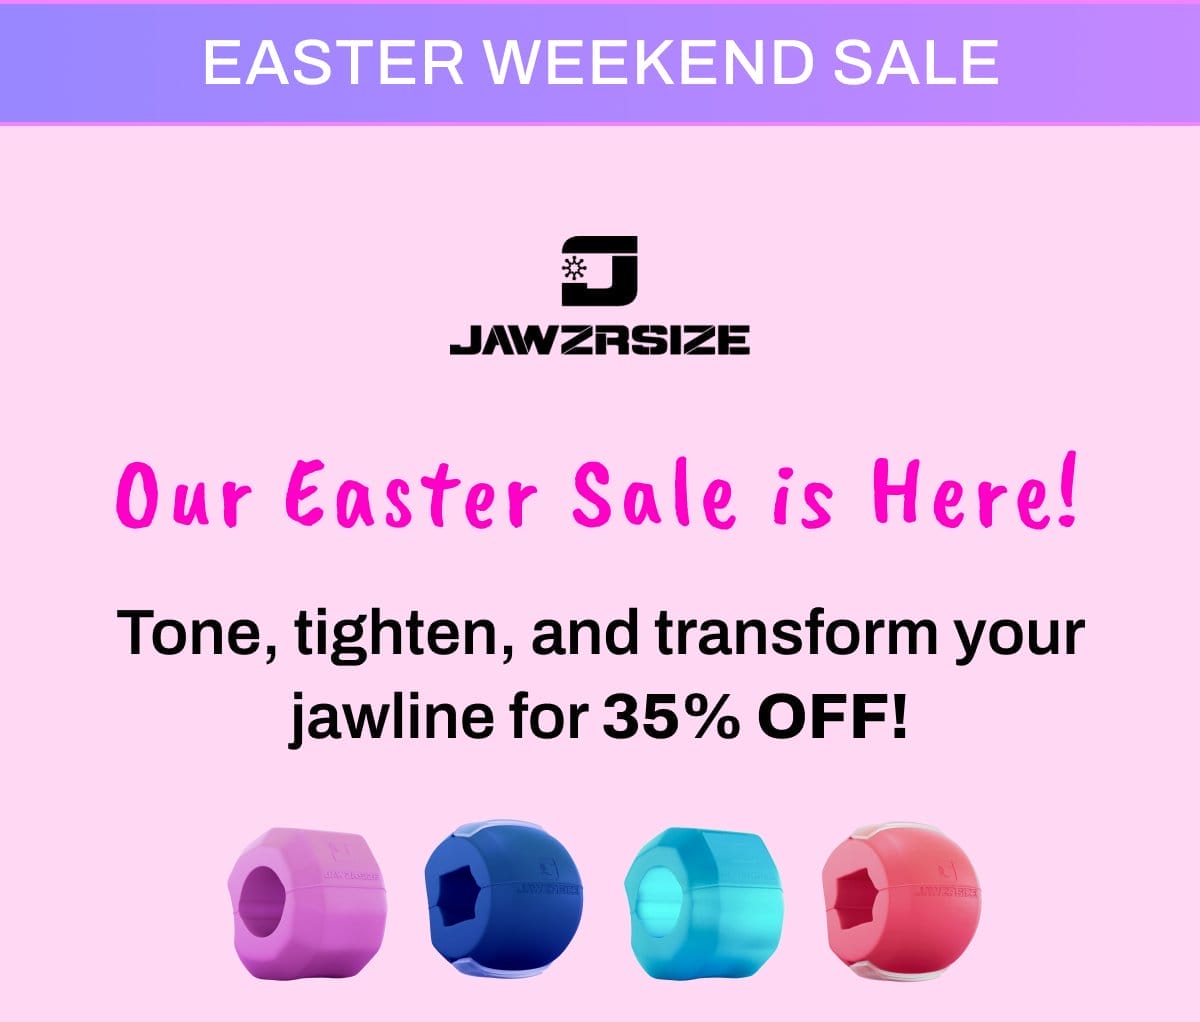 Our easter sale is here! Tone, tighten, and transform your jawline for less.